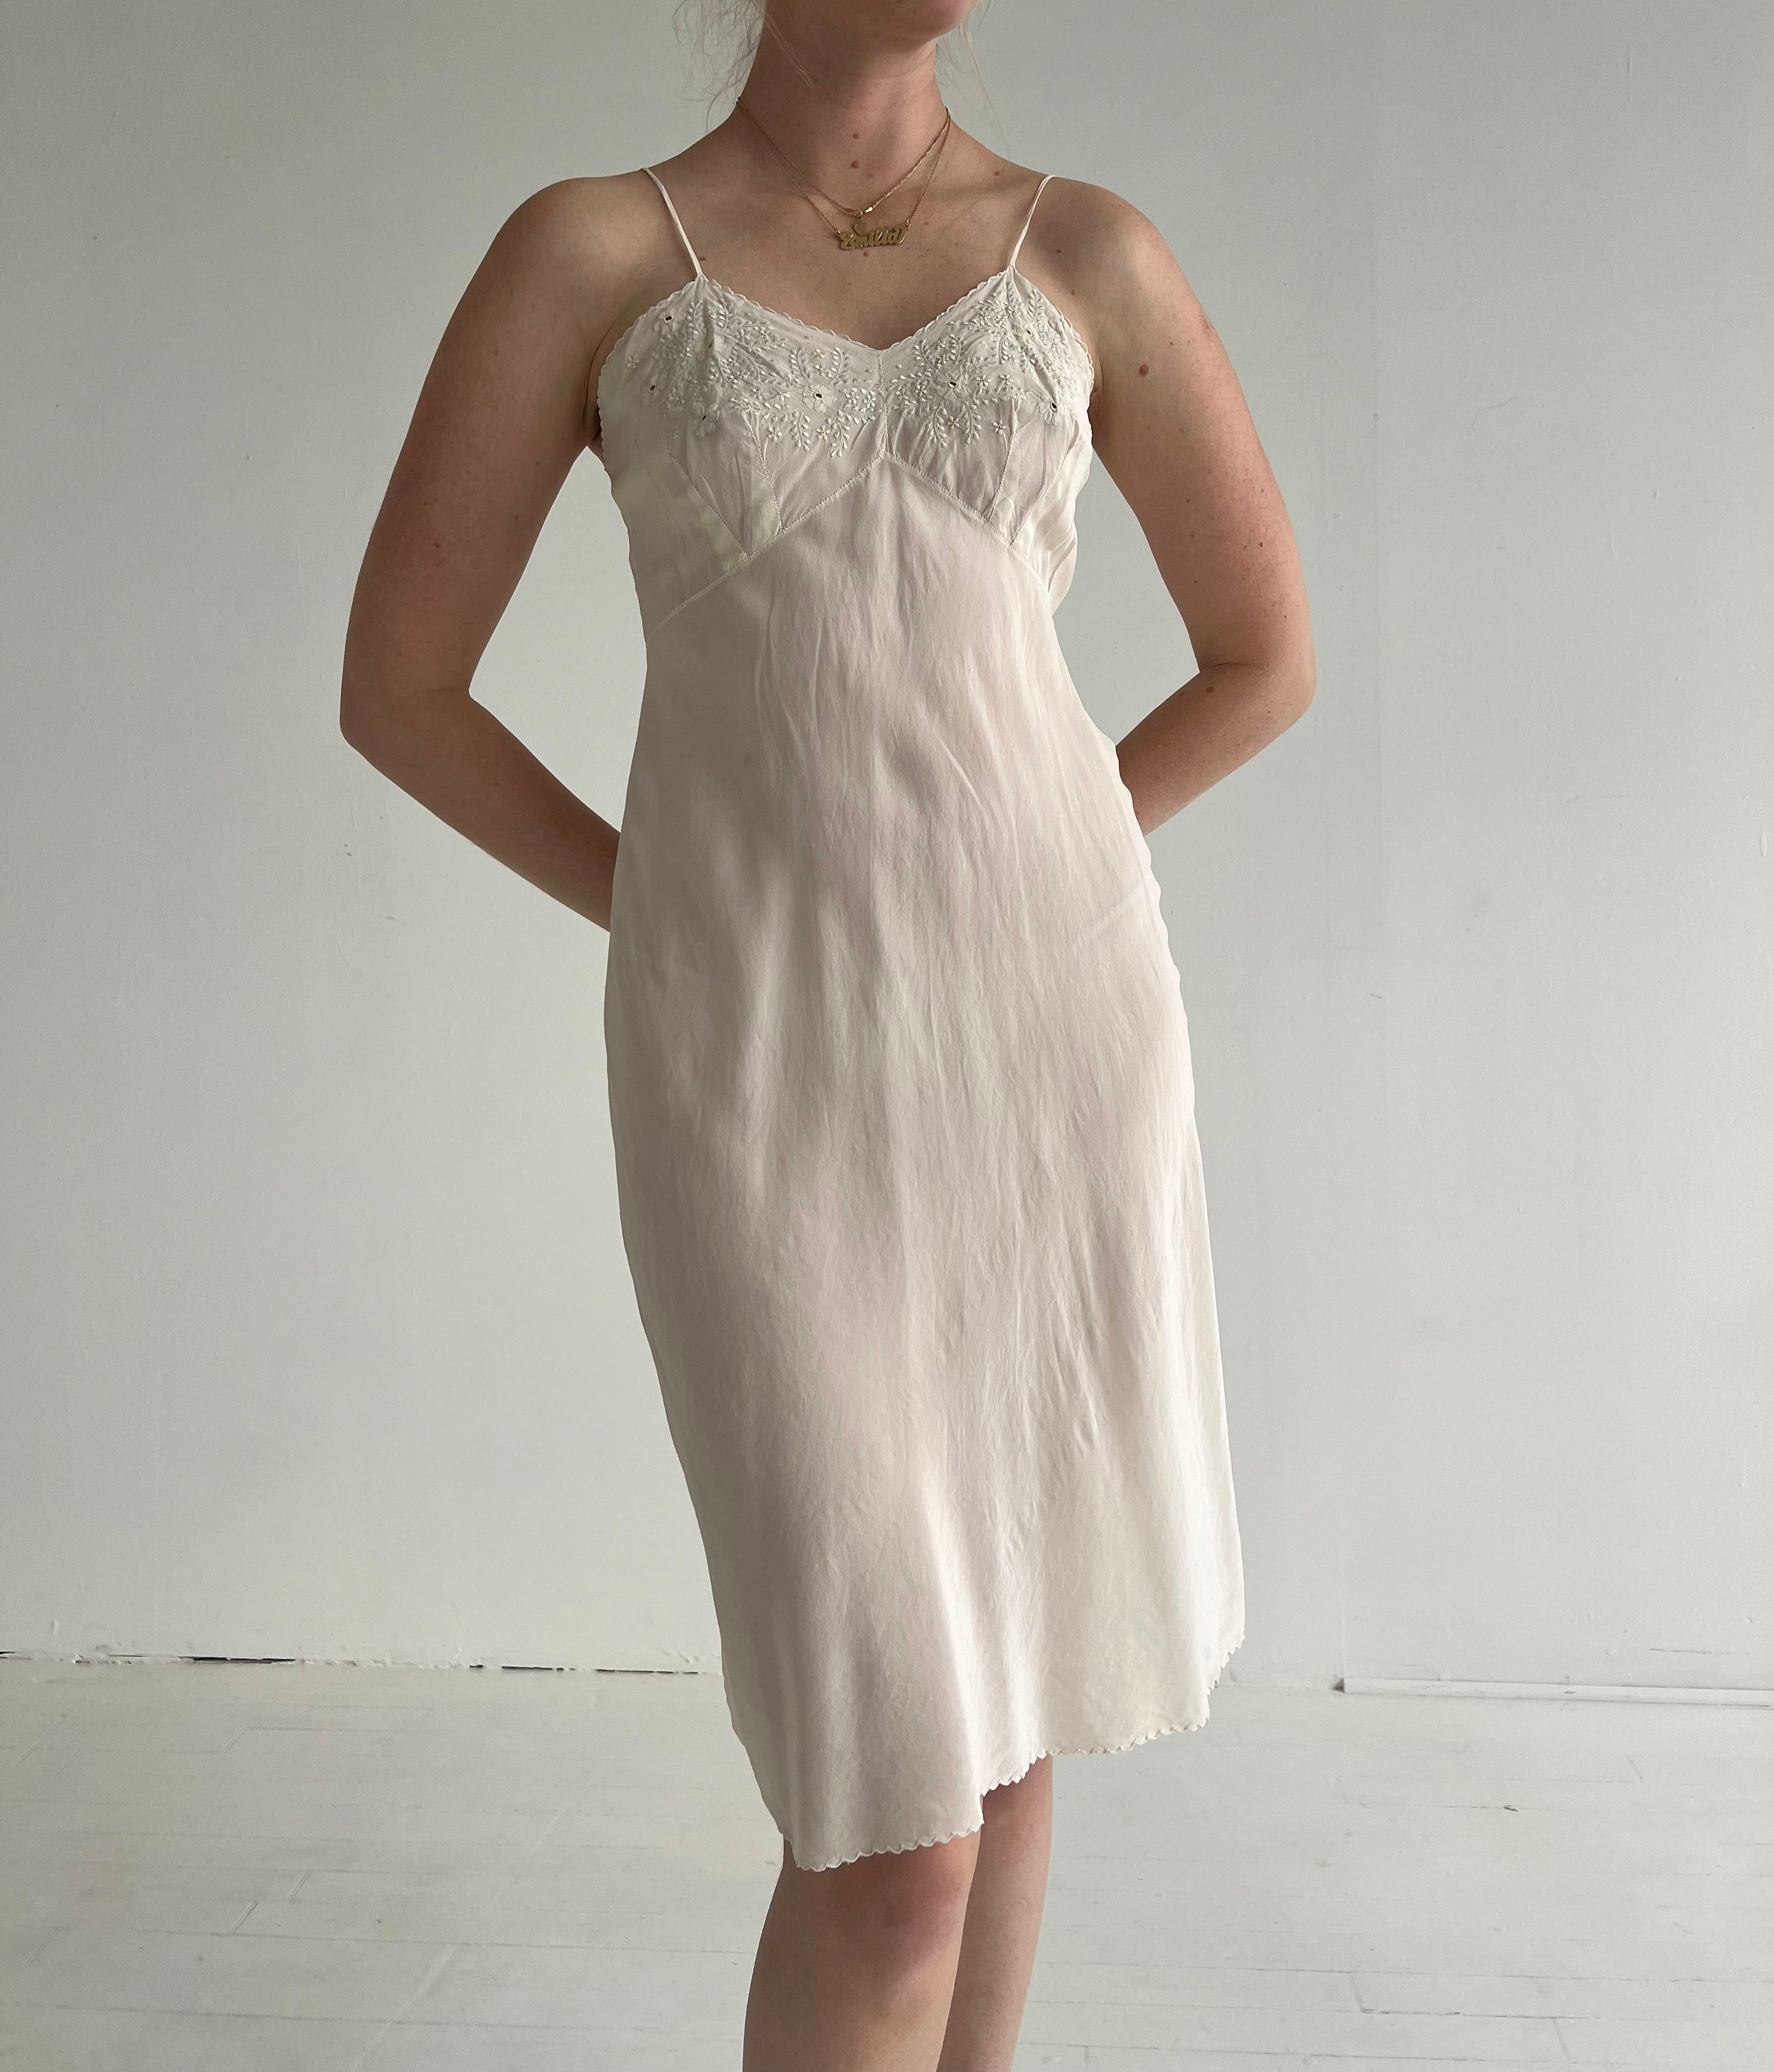 1930's White Silk Slip Dress with Floral Embroidery